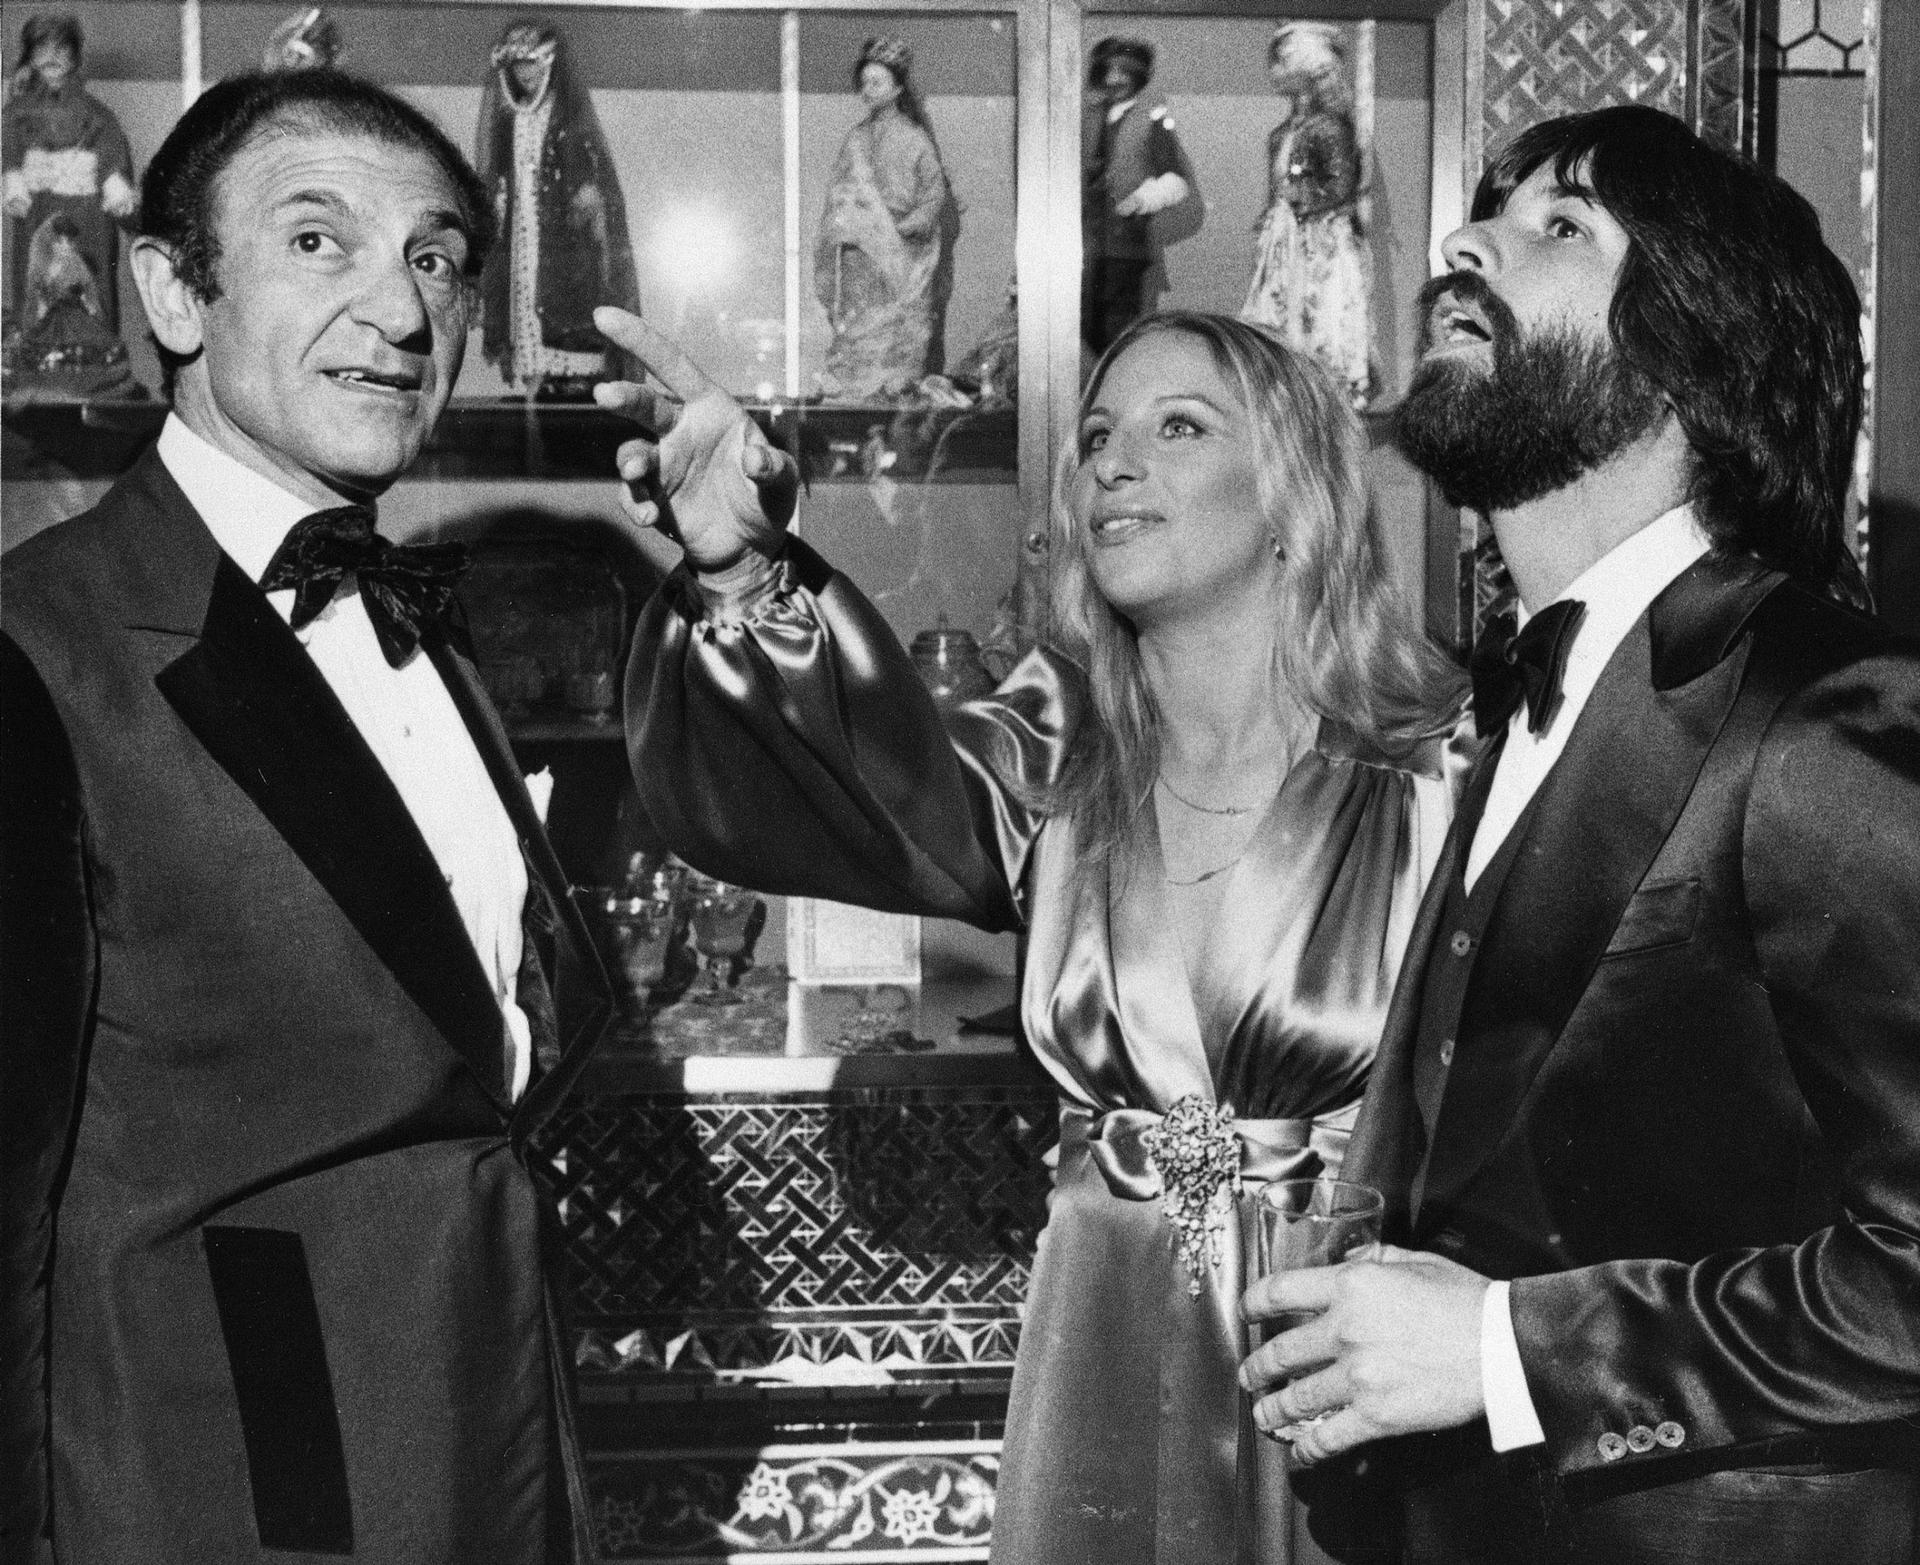 Iran's former Ambassador Ardeshir Zahedi, left, talks with actress Barbra Streisand is shown looking up and pointing.